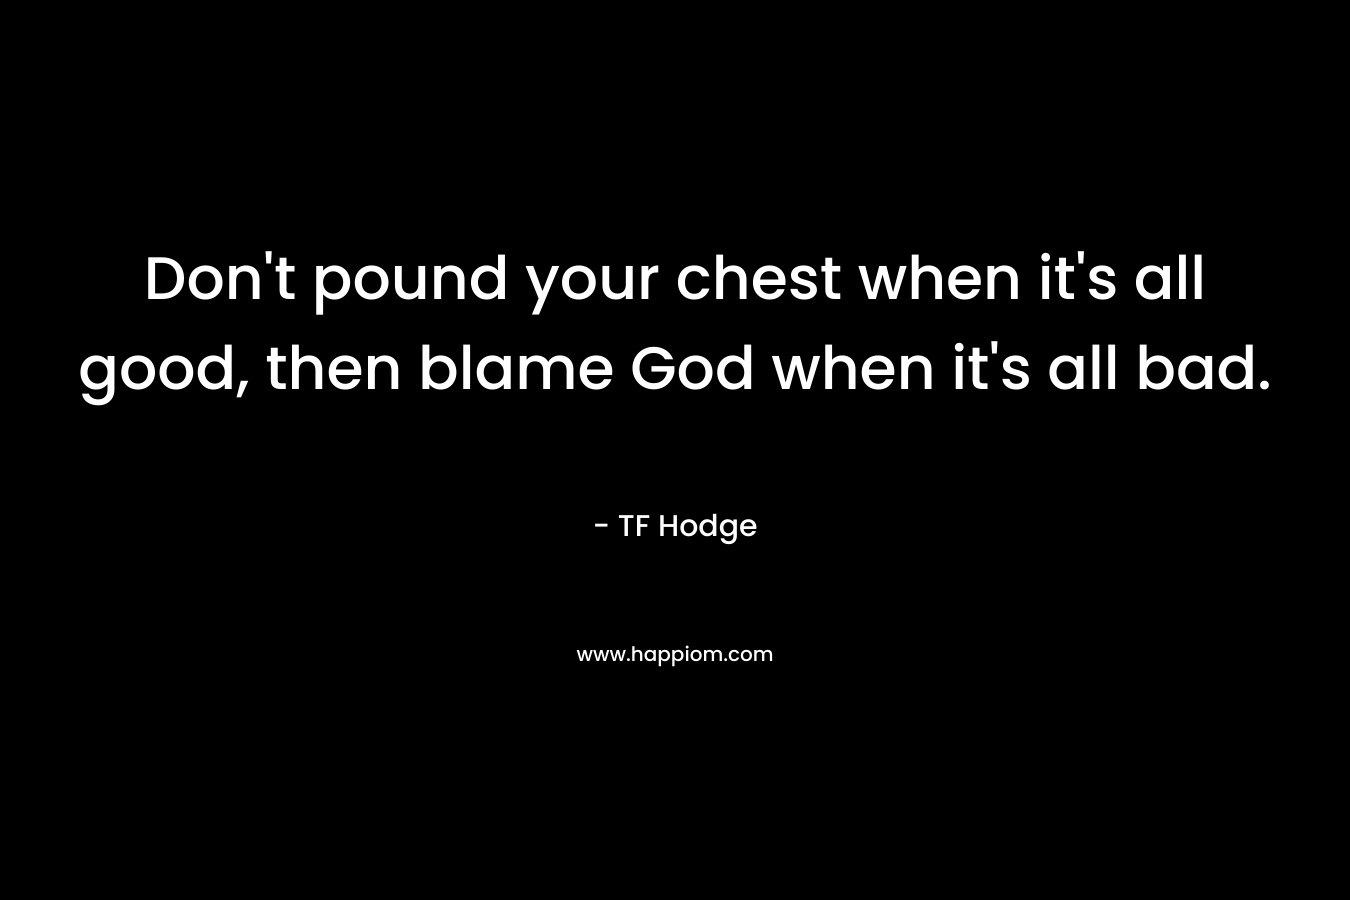 Don't pound your chest when it's all good, then blame God when it's all bad.